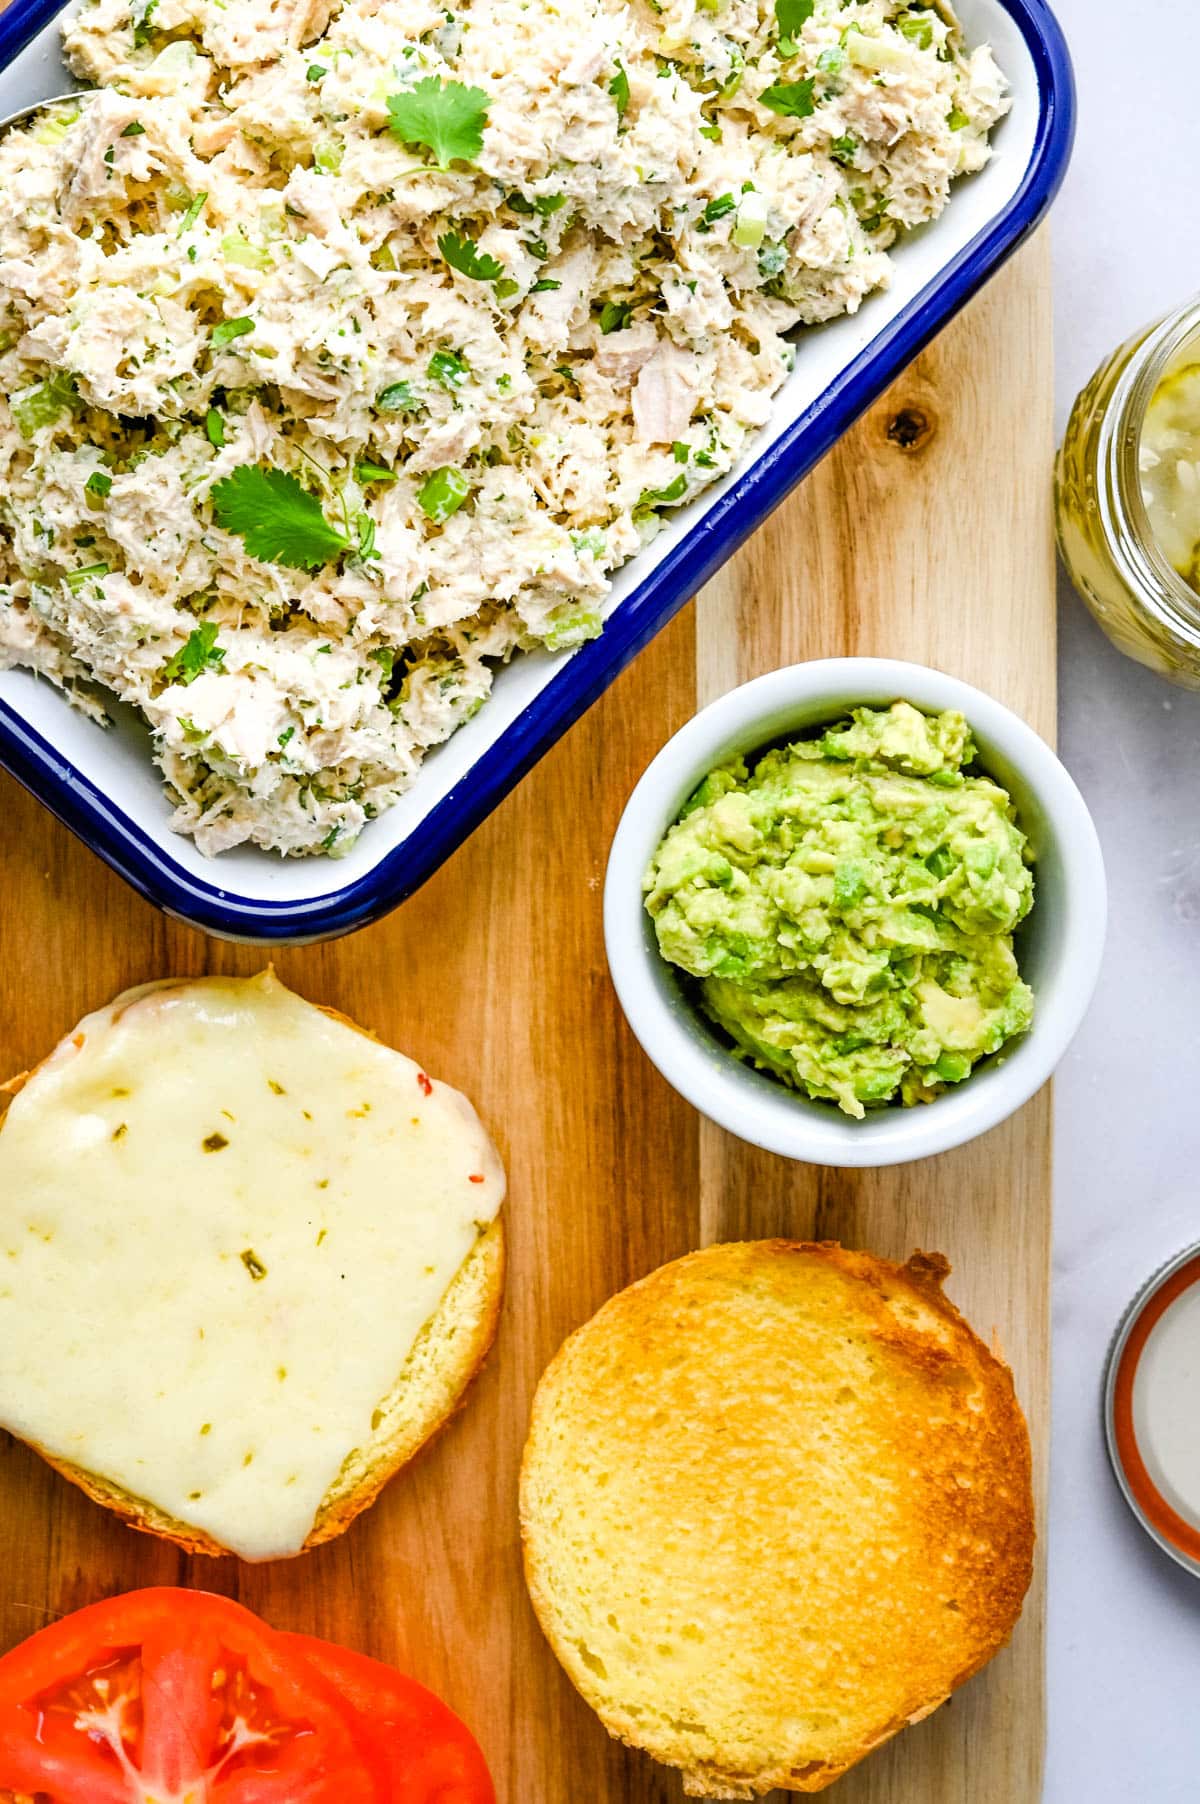 Ingredients for the ultimate tuna salad sandwich are spicy tuna fish salad, mashed avocado, melty pepper jack cheese and pickles on a brioche bun.